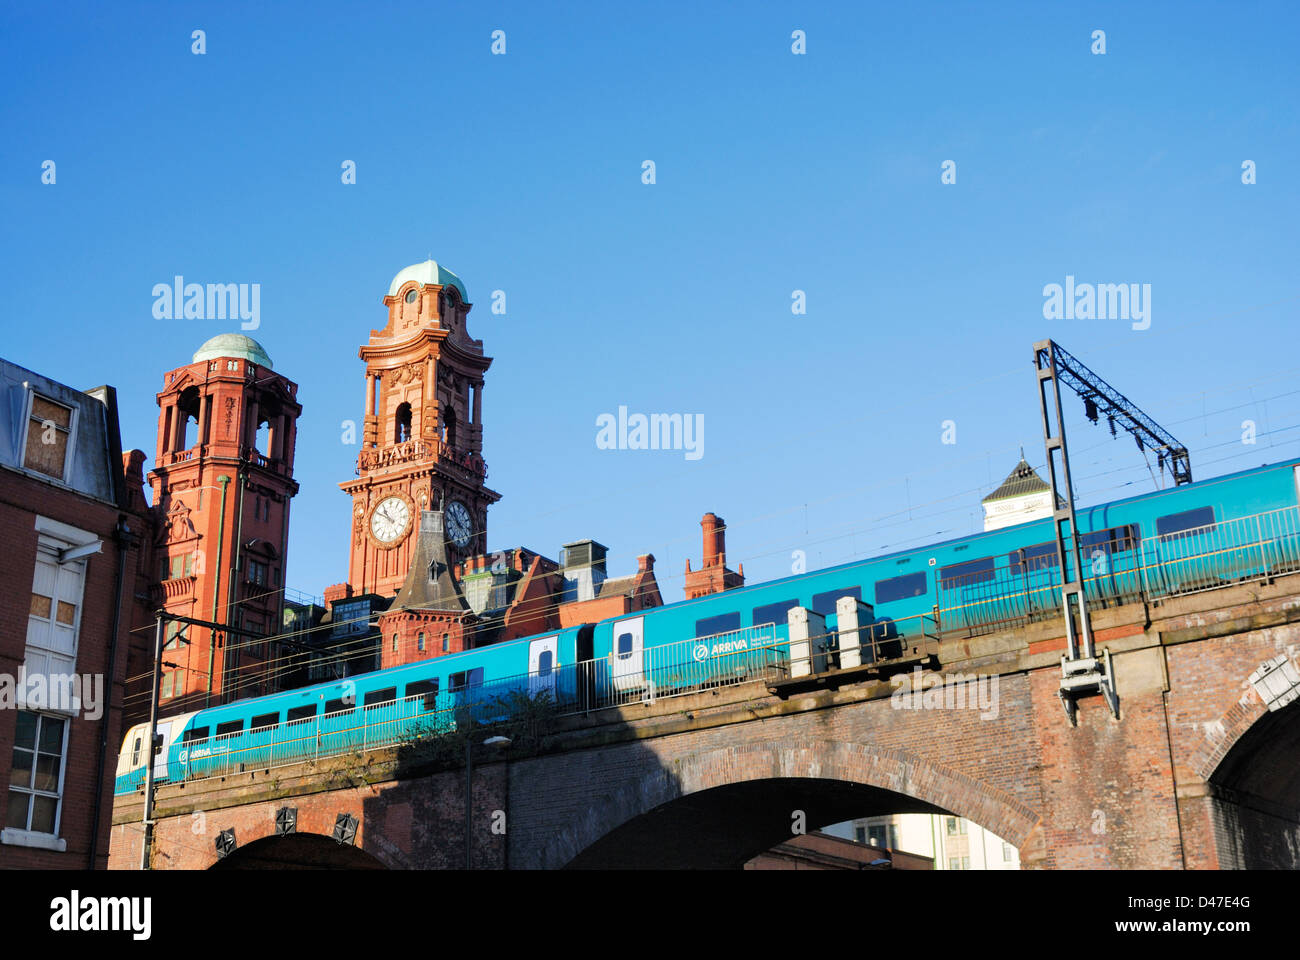 Commuter train passing through Manchester city centre by Oxford Road with the Refuge Building in the background. Stock Photo